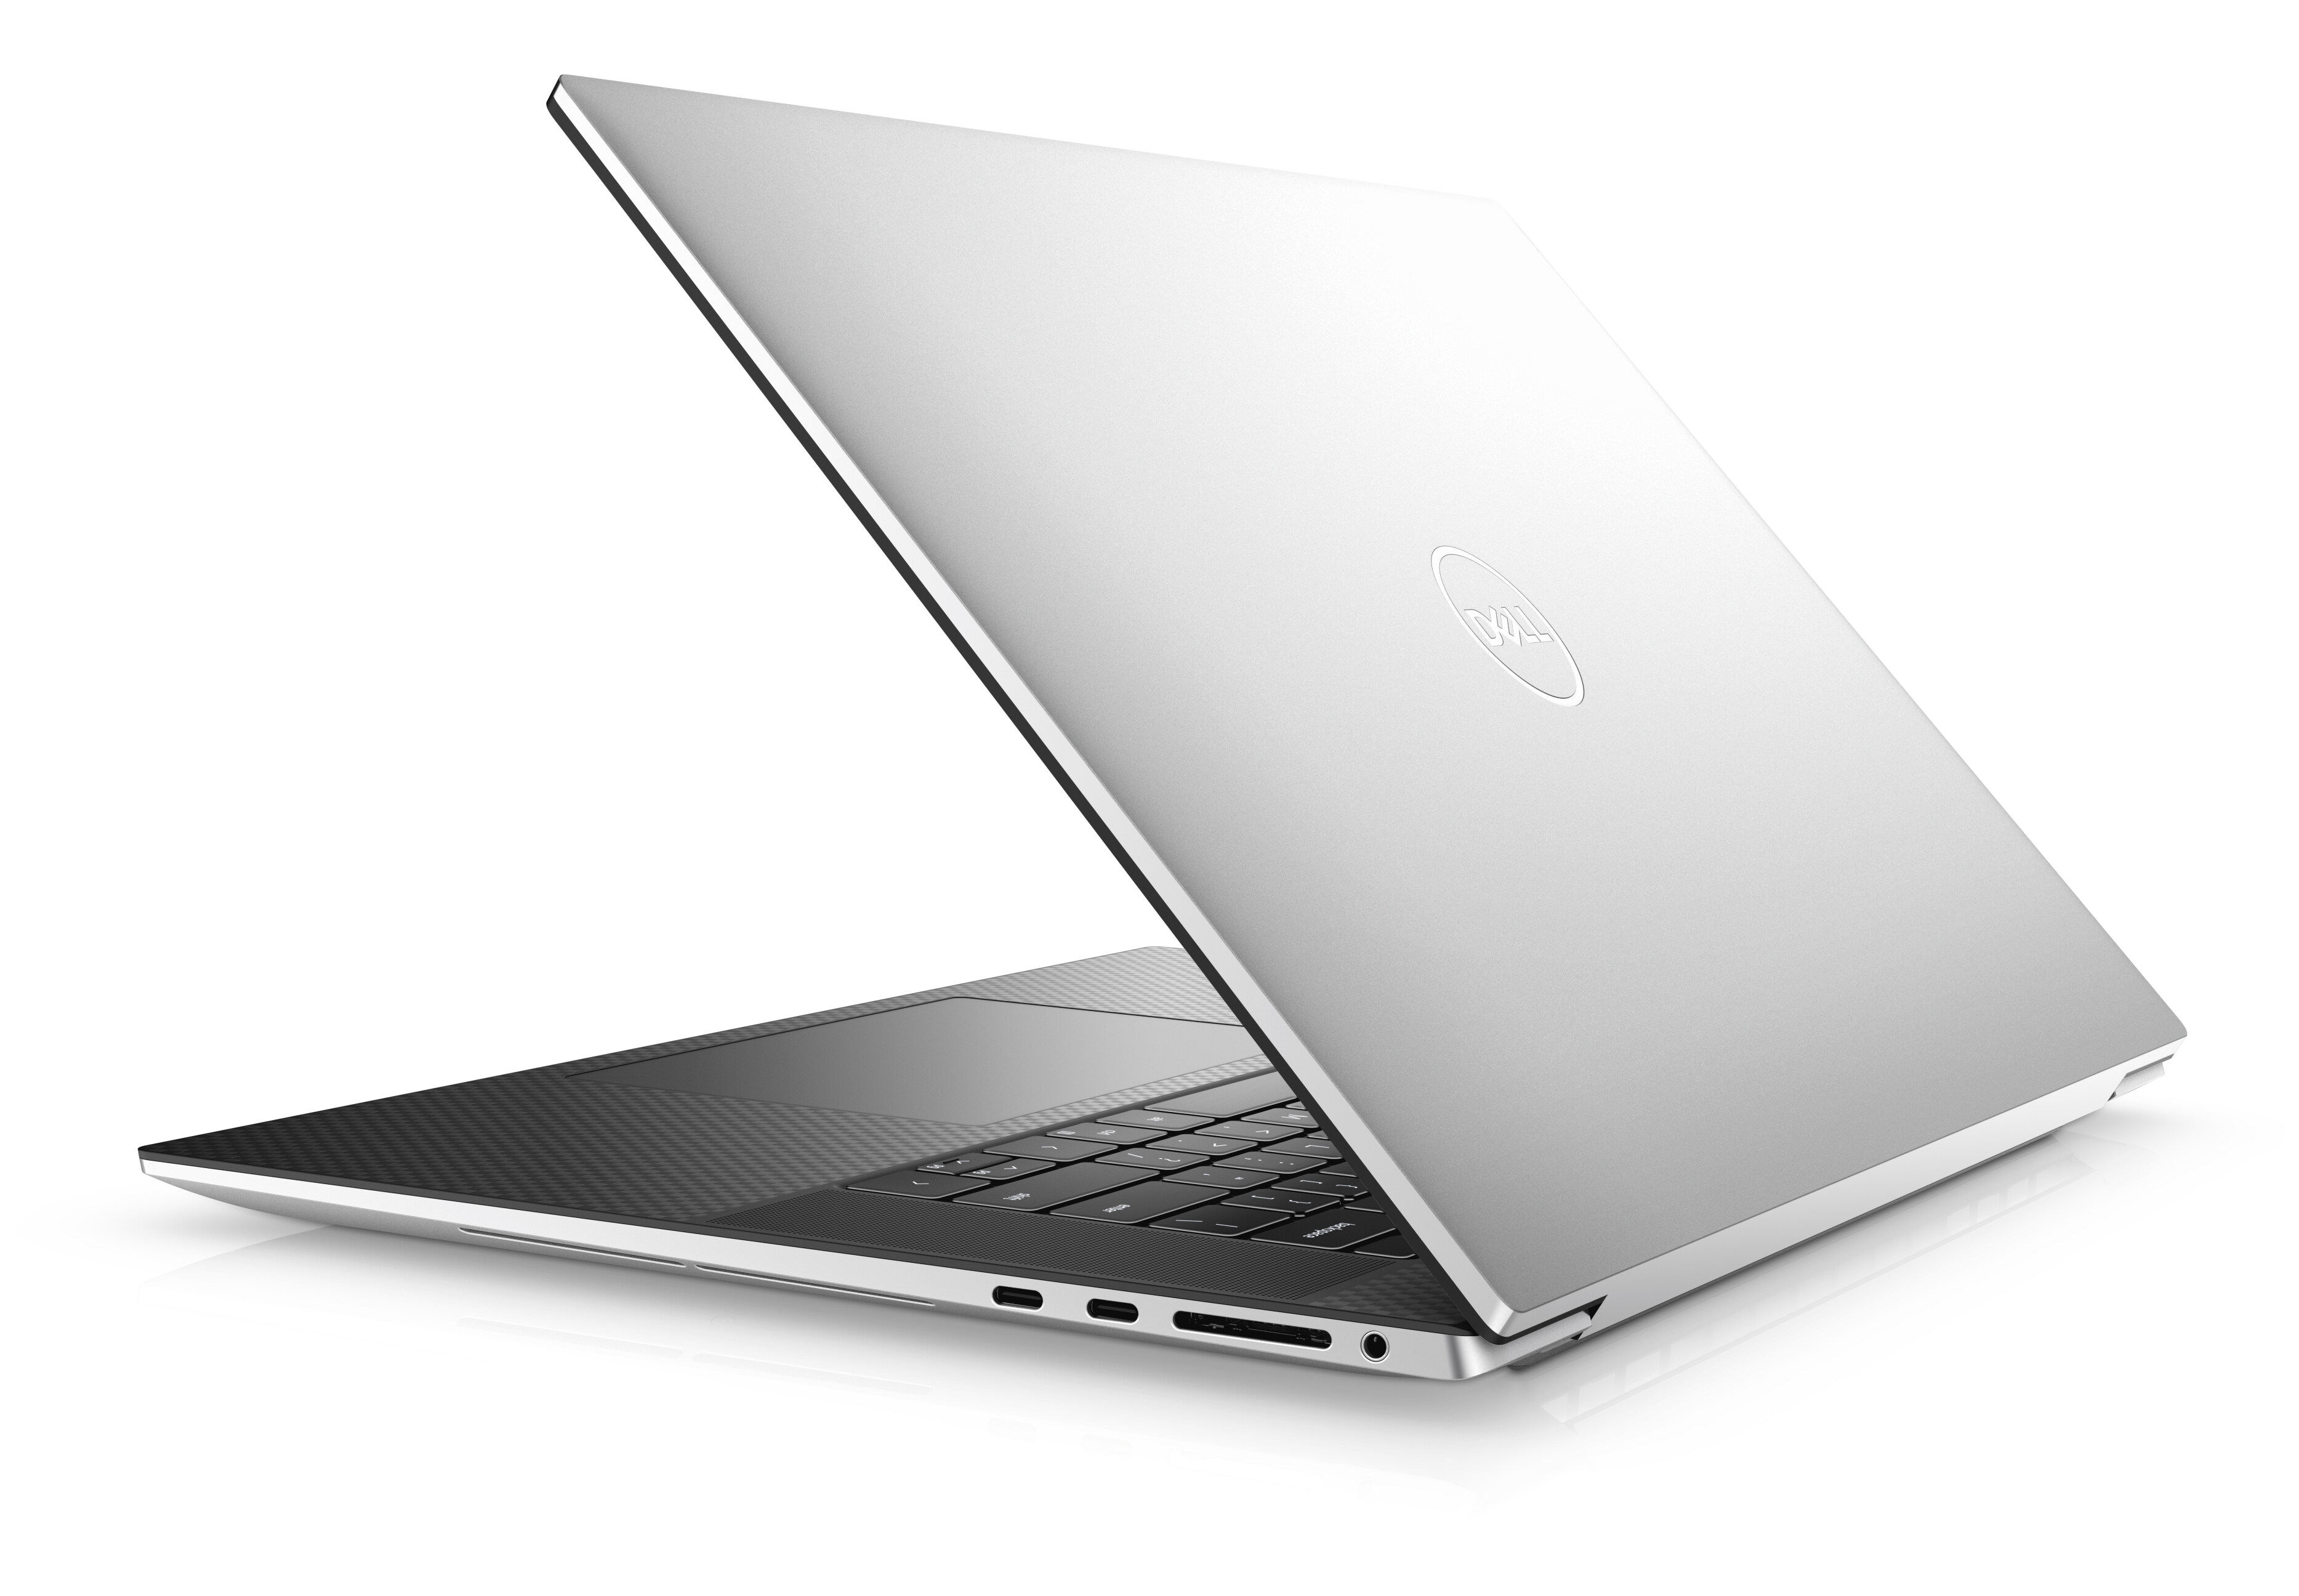 XPS 17 9700 Laptop with Intel 10th Gen CPU & 4K Display | Dell Canada